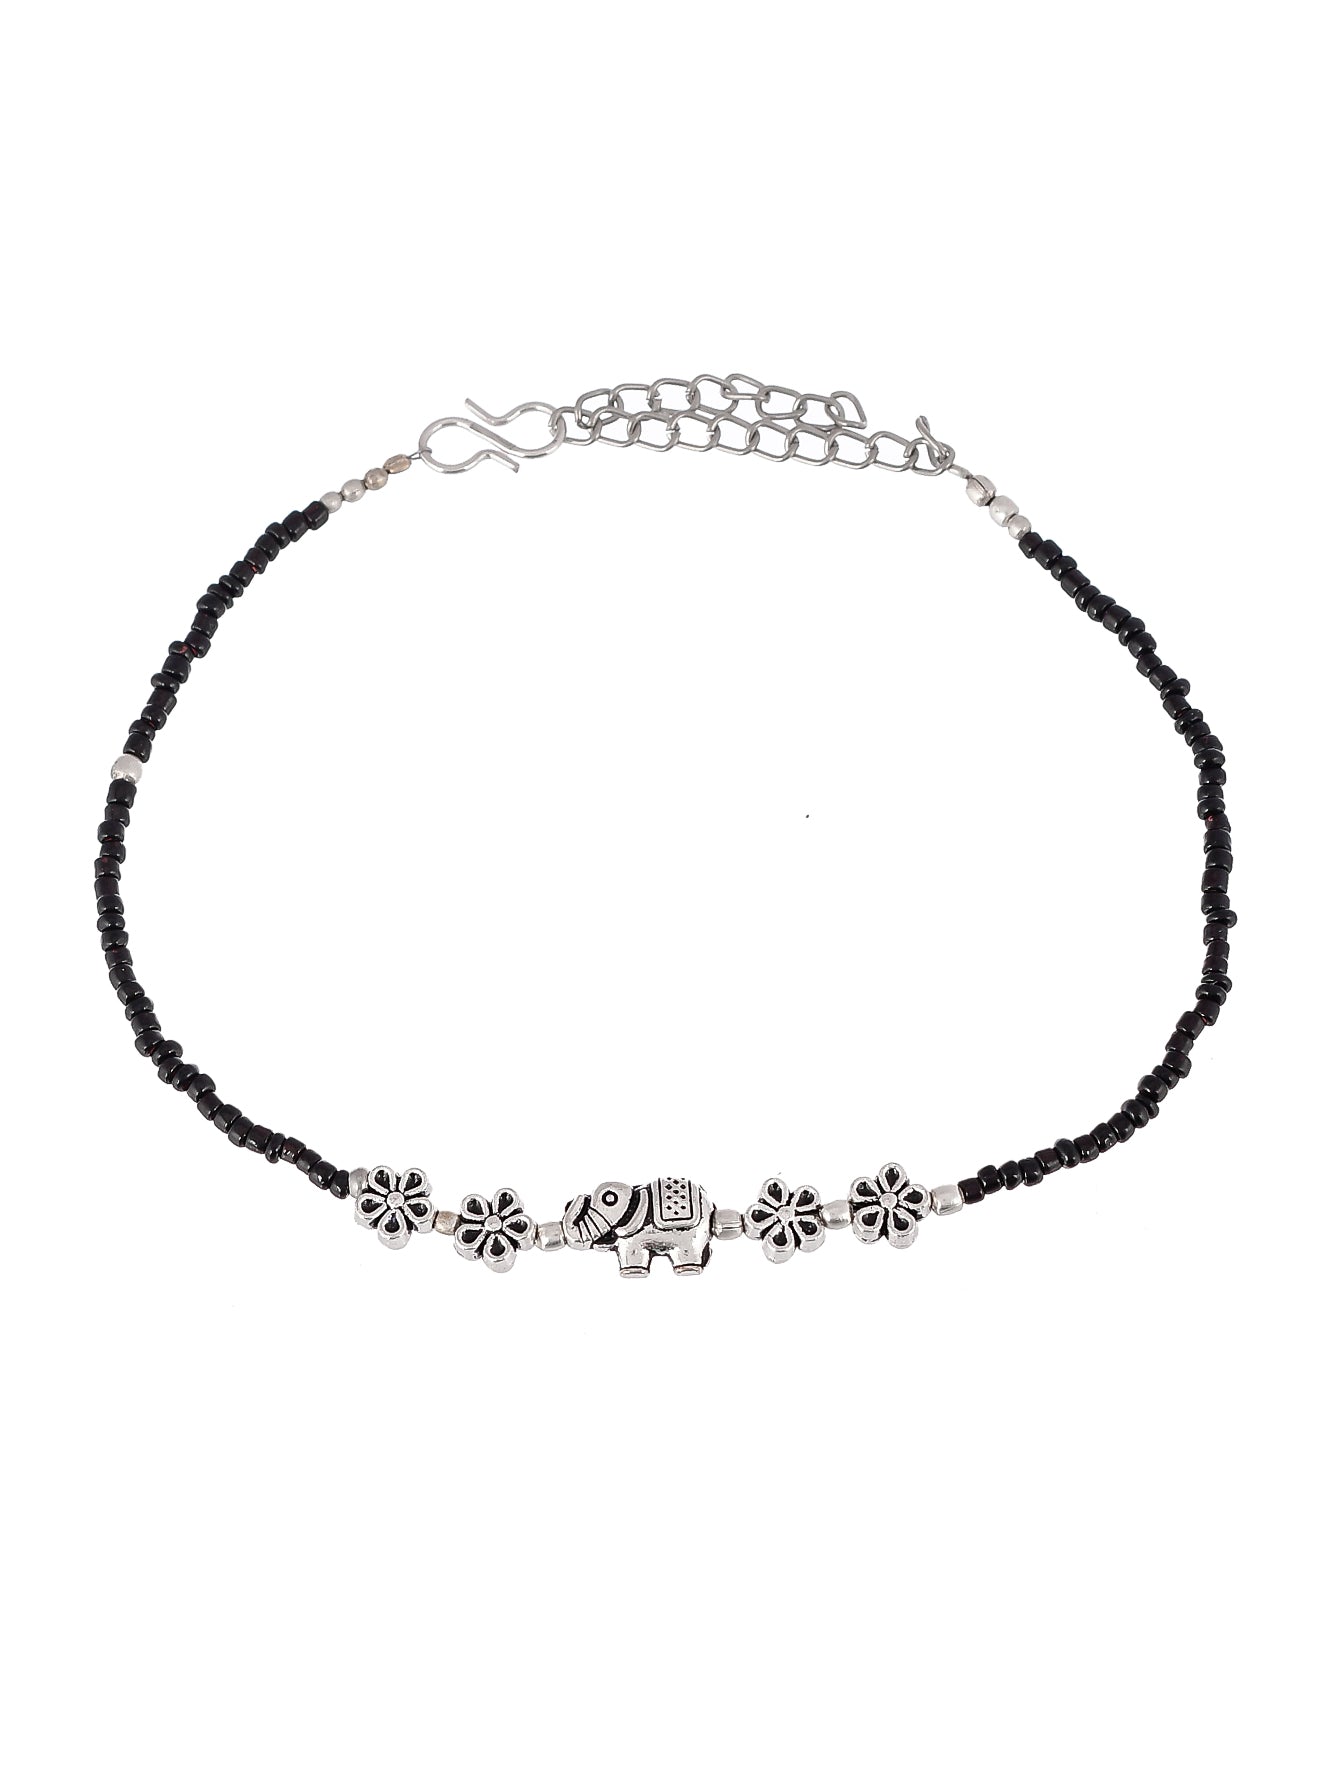 Black Beaded Chain Anklet with Elephant